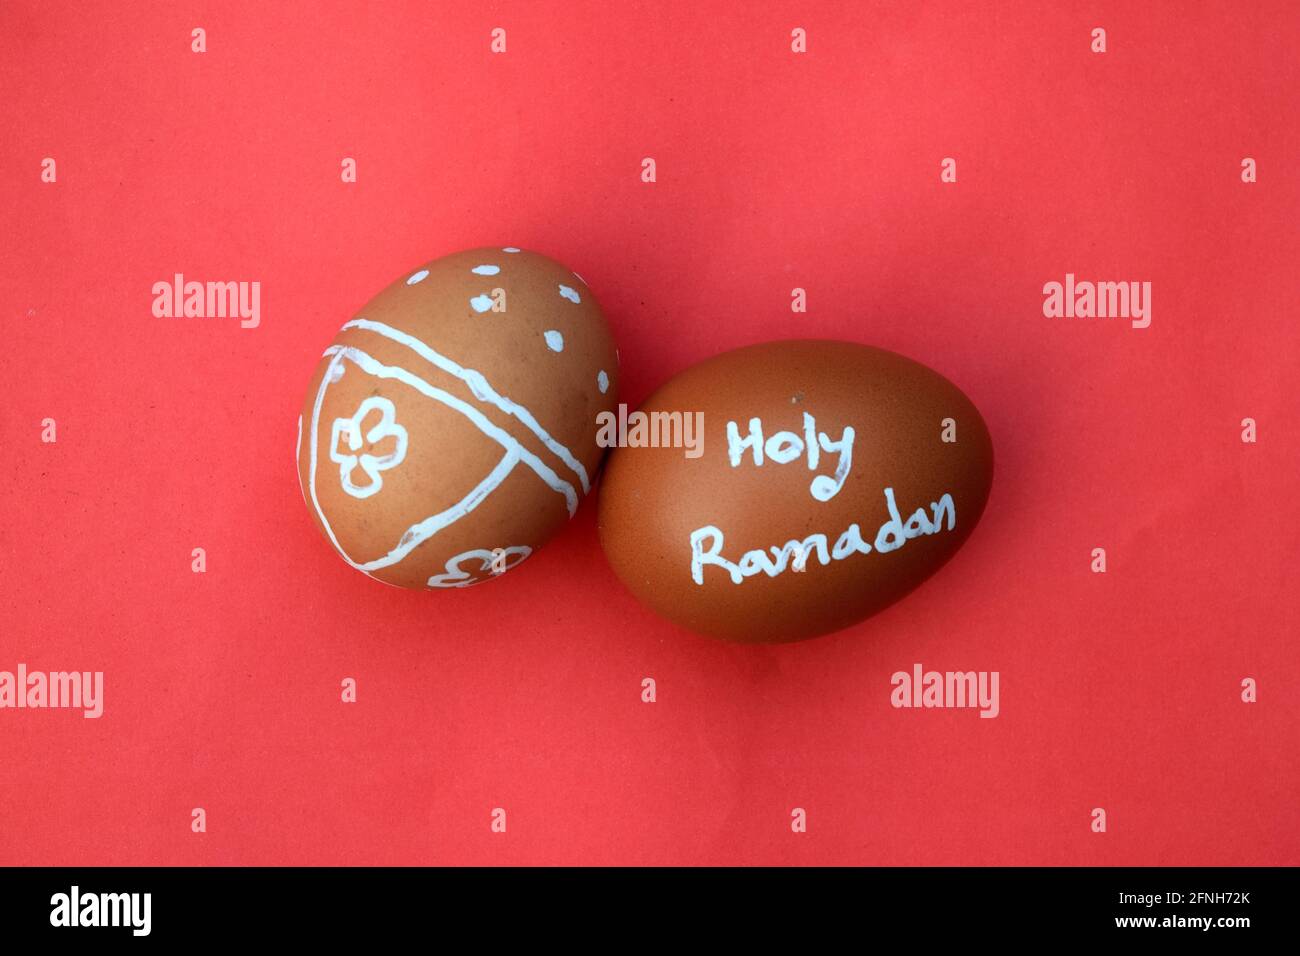 Holy Ramadan hand typography on the egg. Red isolated background. Stock Photo